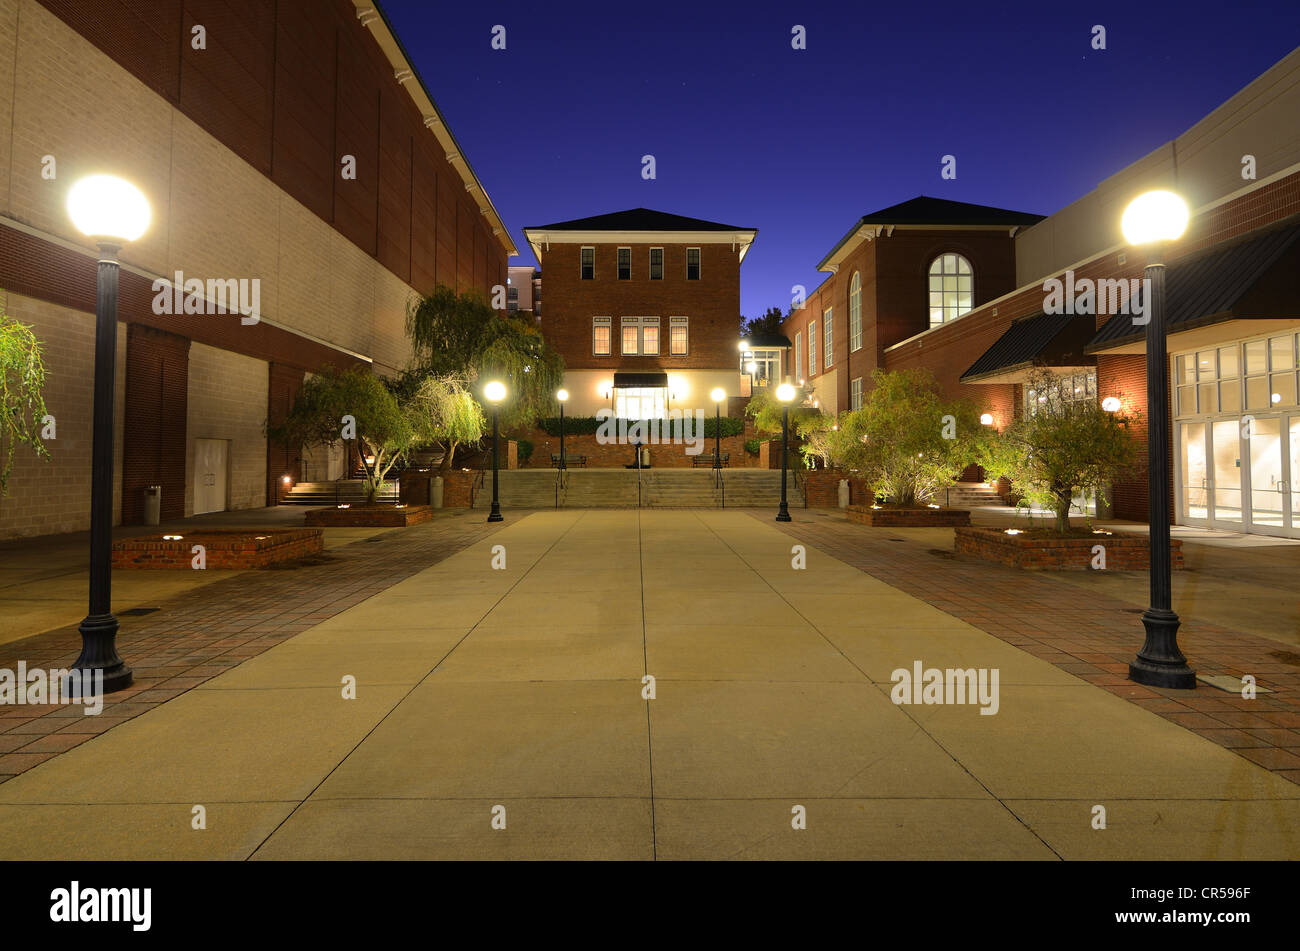 Lit courtyard and common area Stock Photo